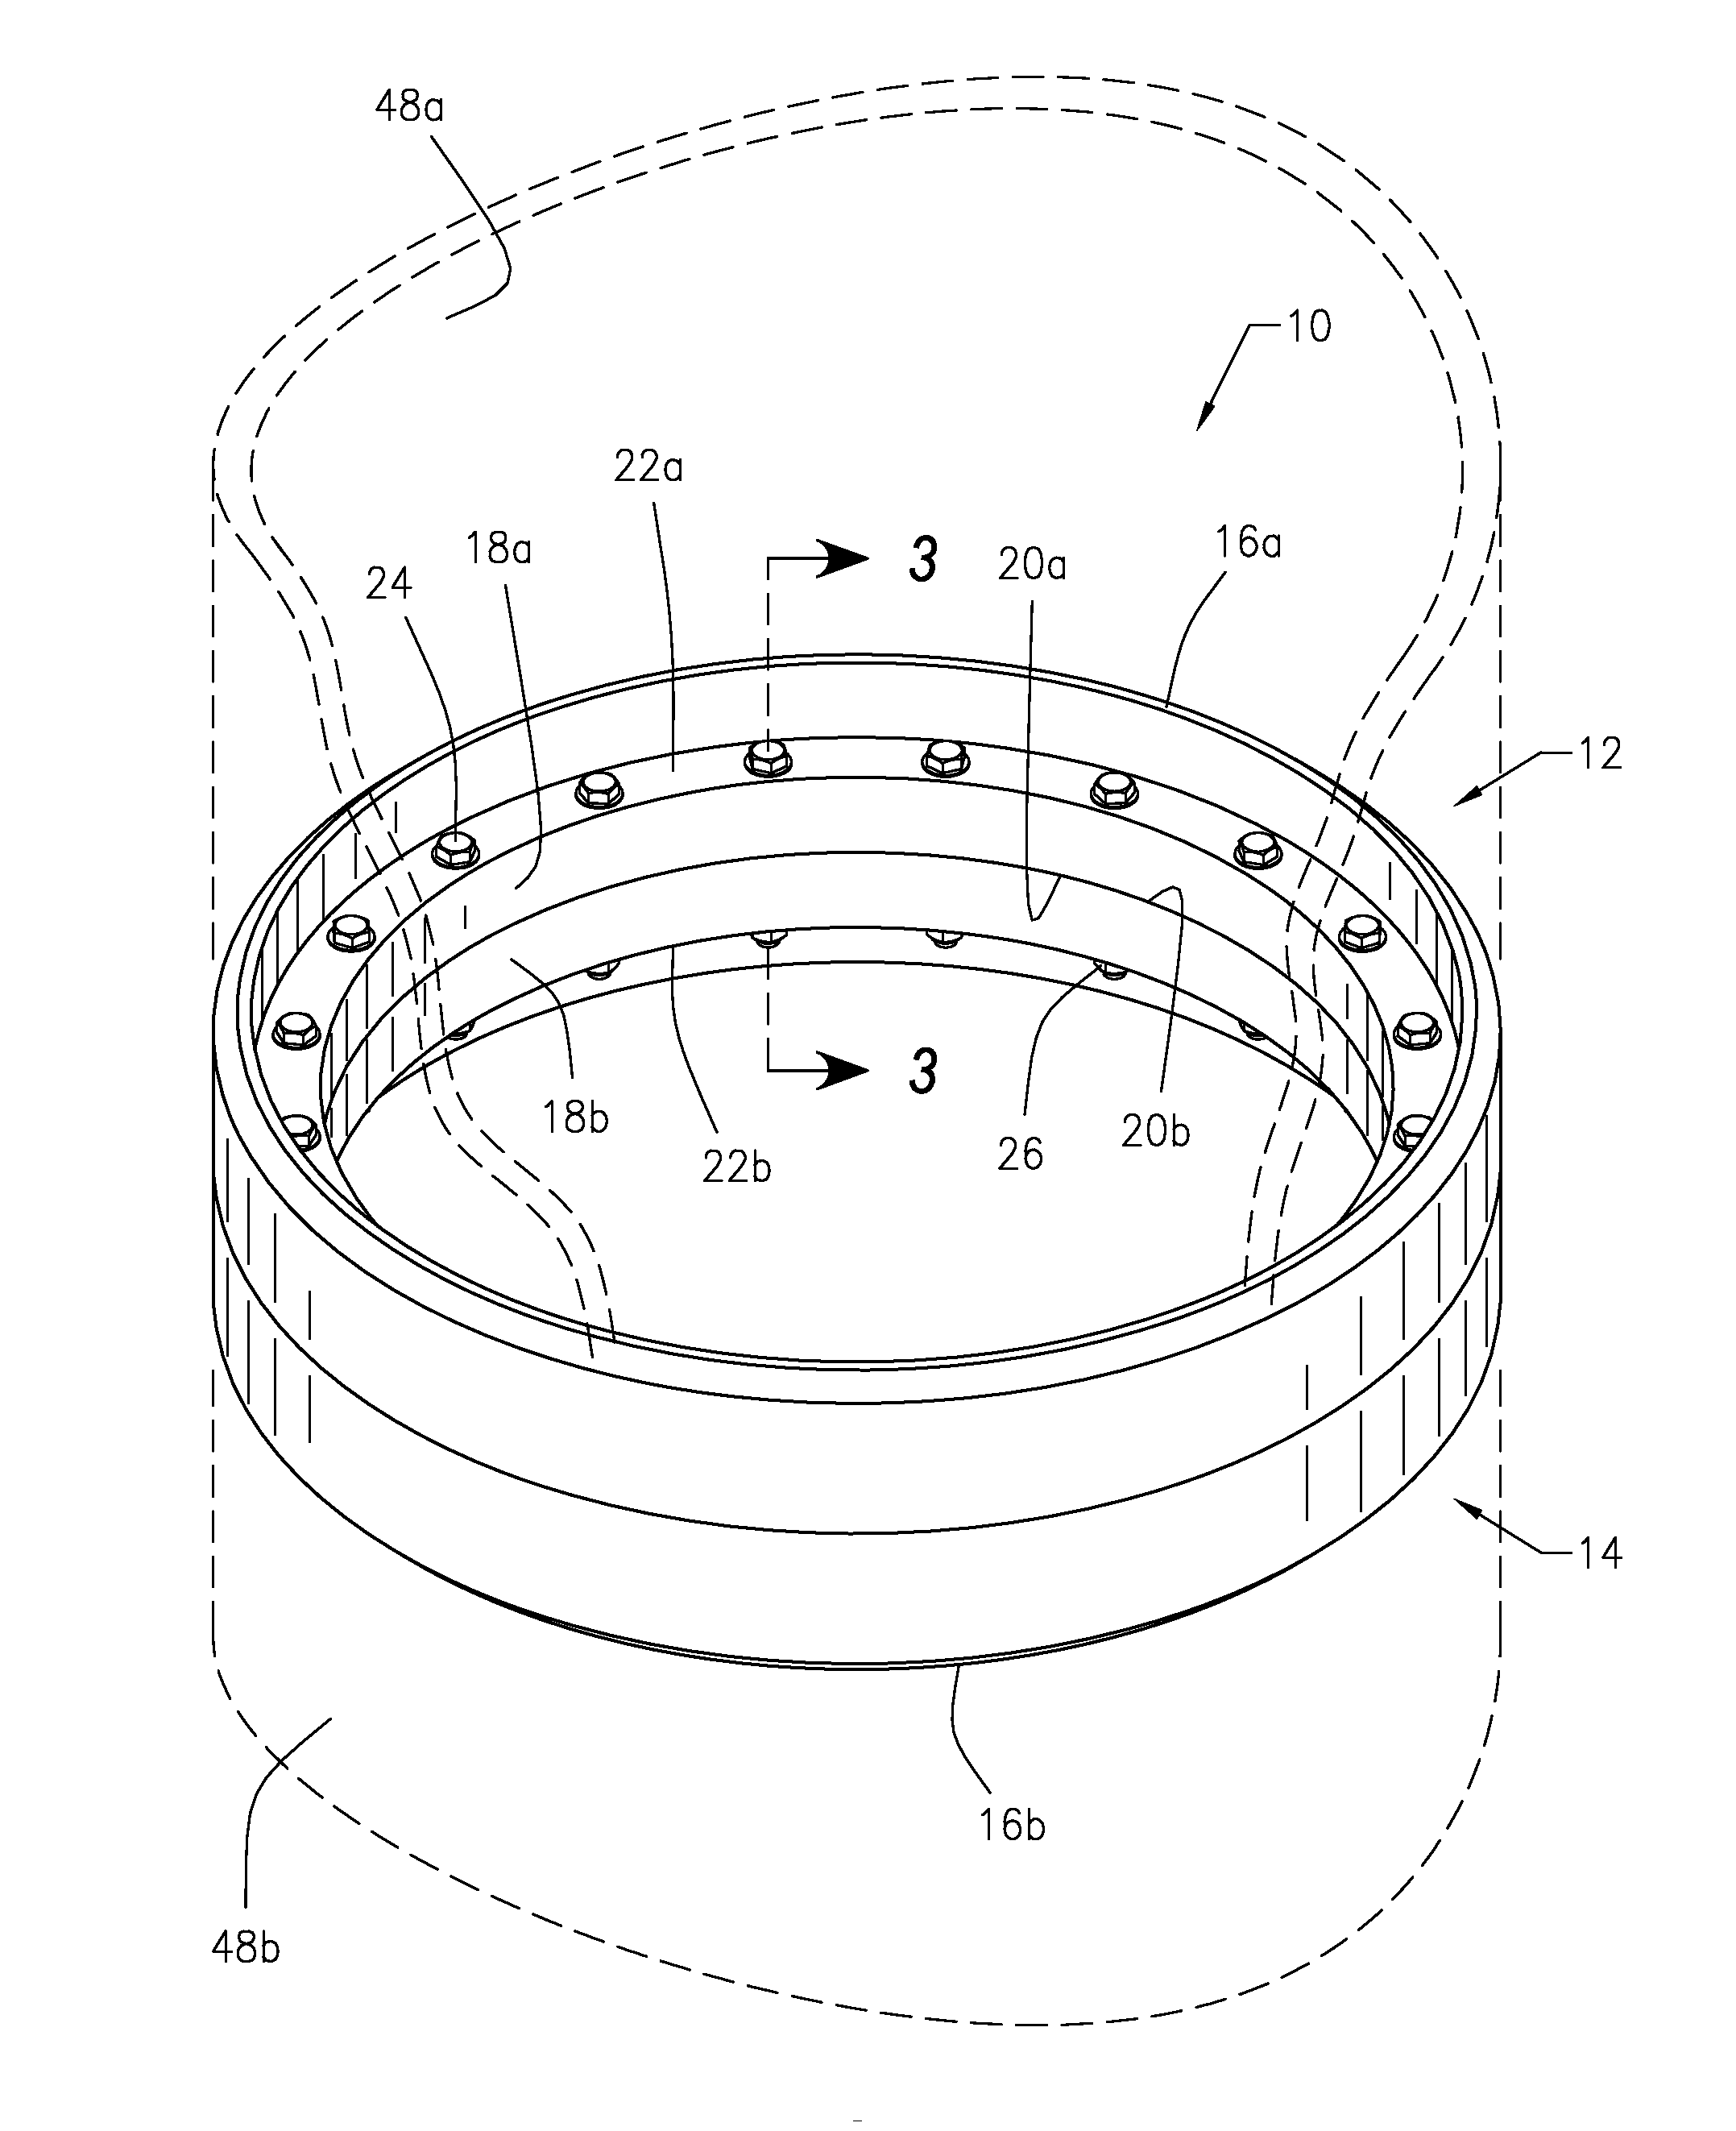 Structural flange connection system and method